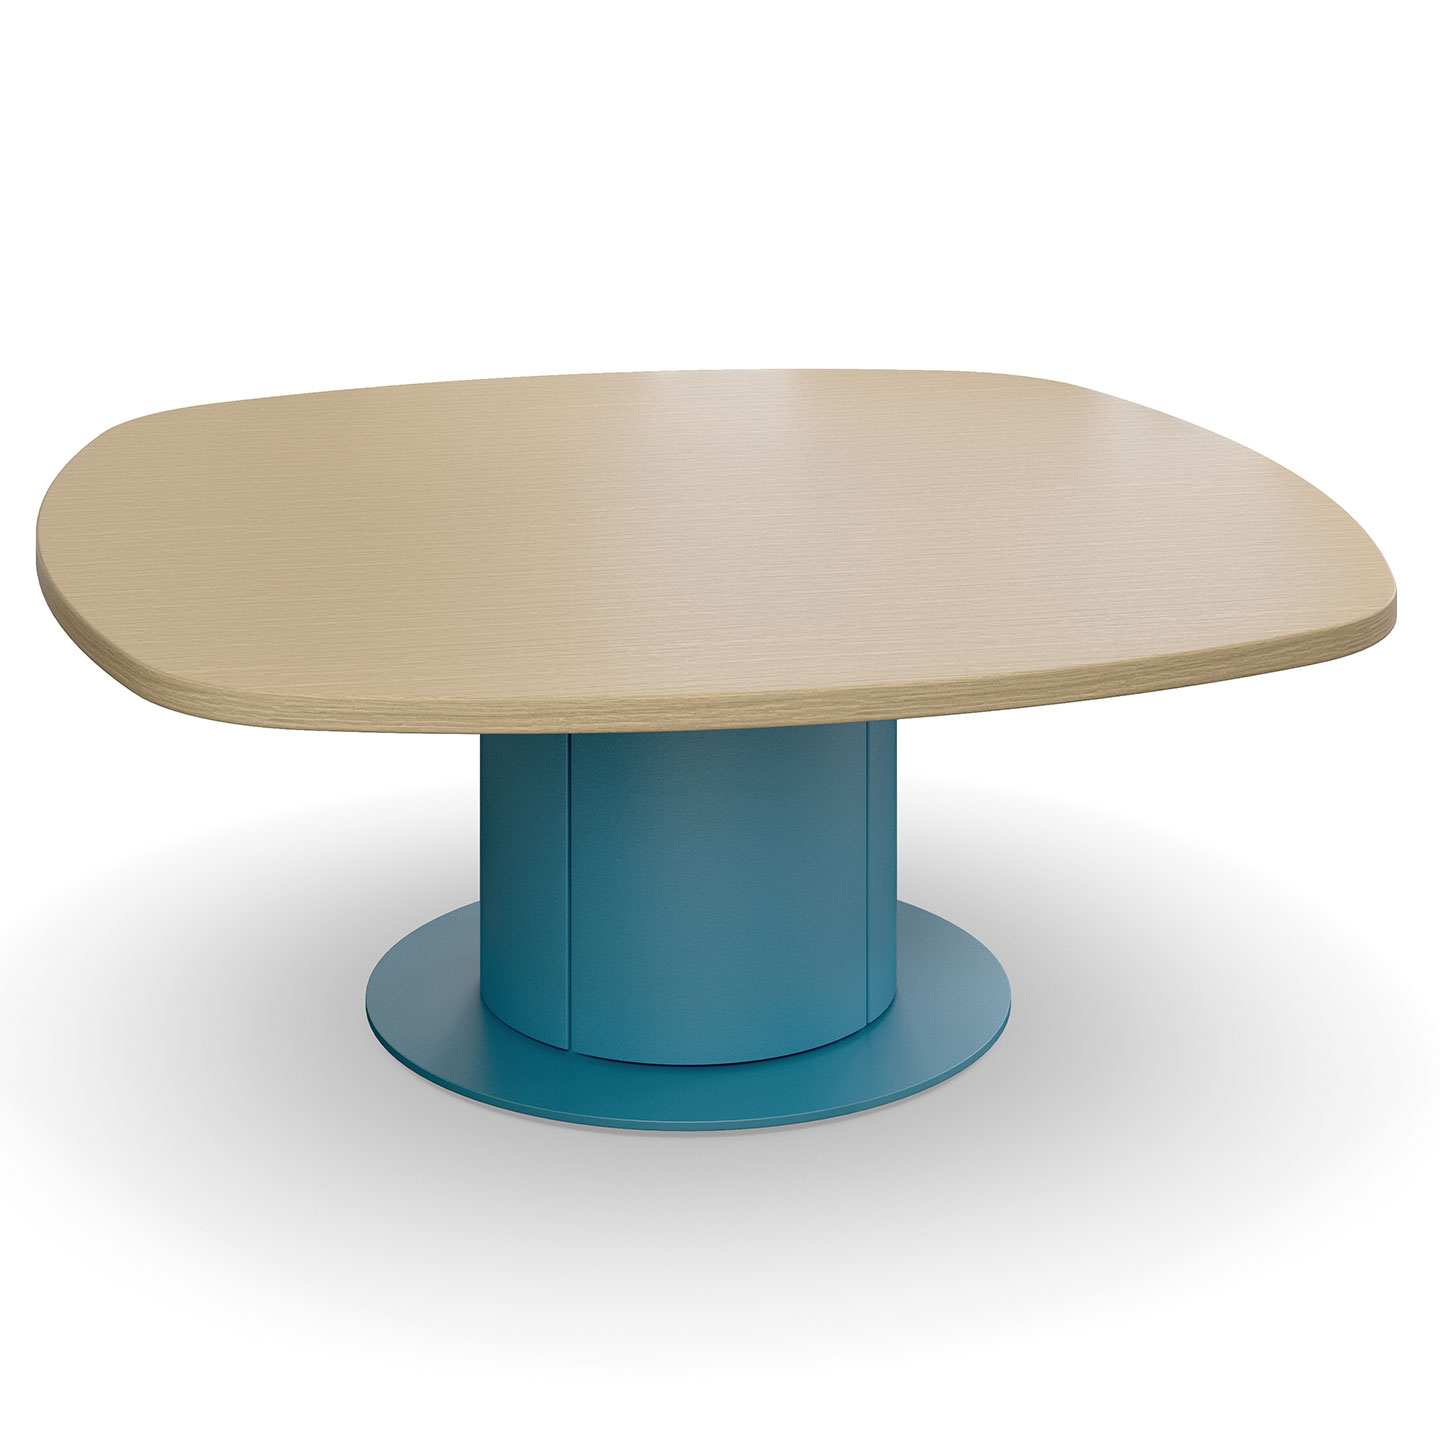 Haworth Planes Conference Table with blue base and veneer top